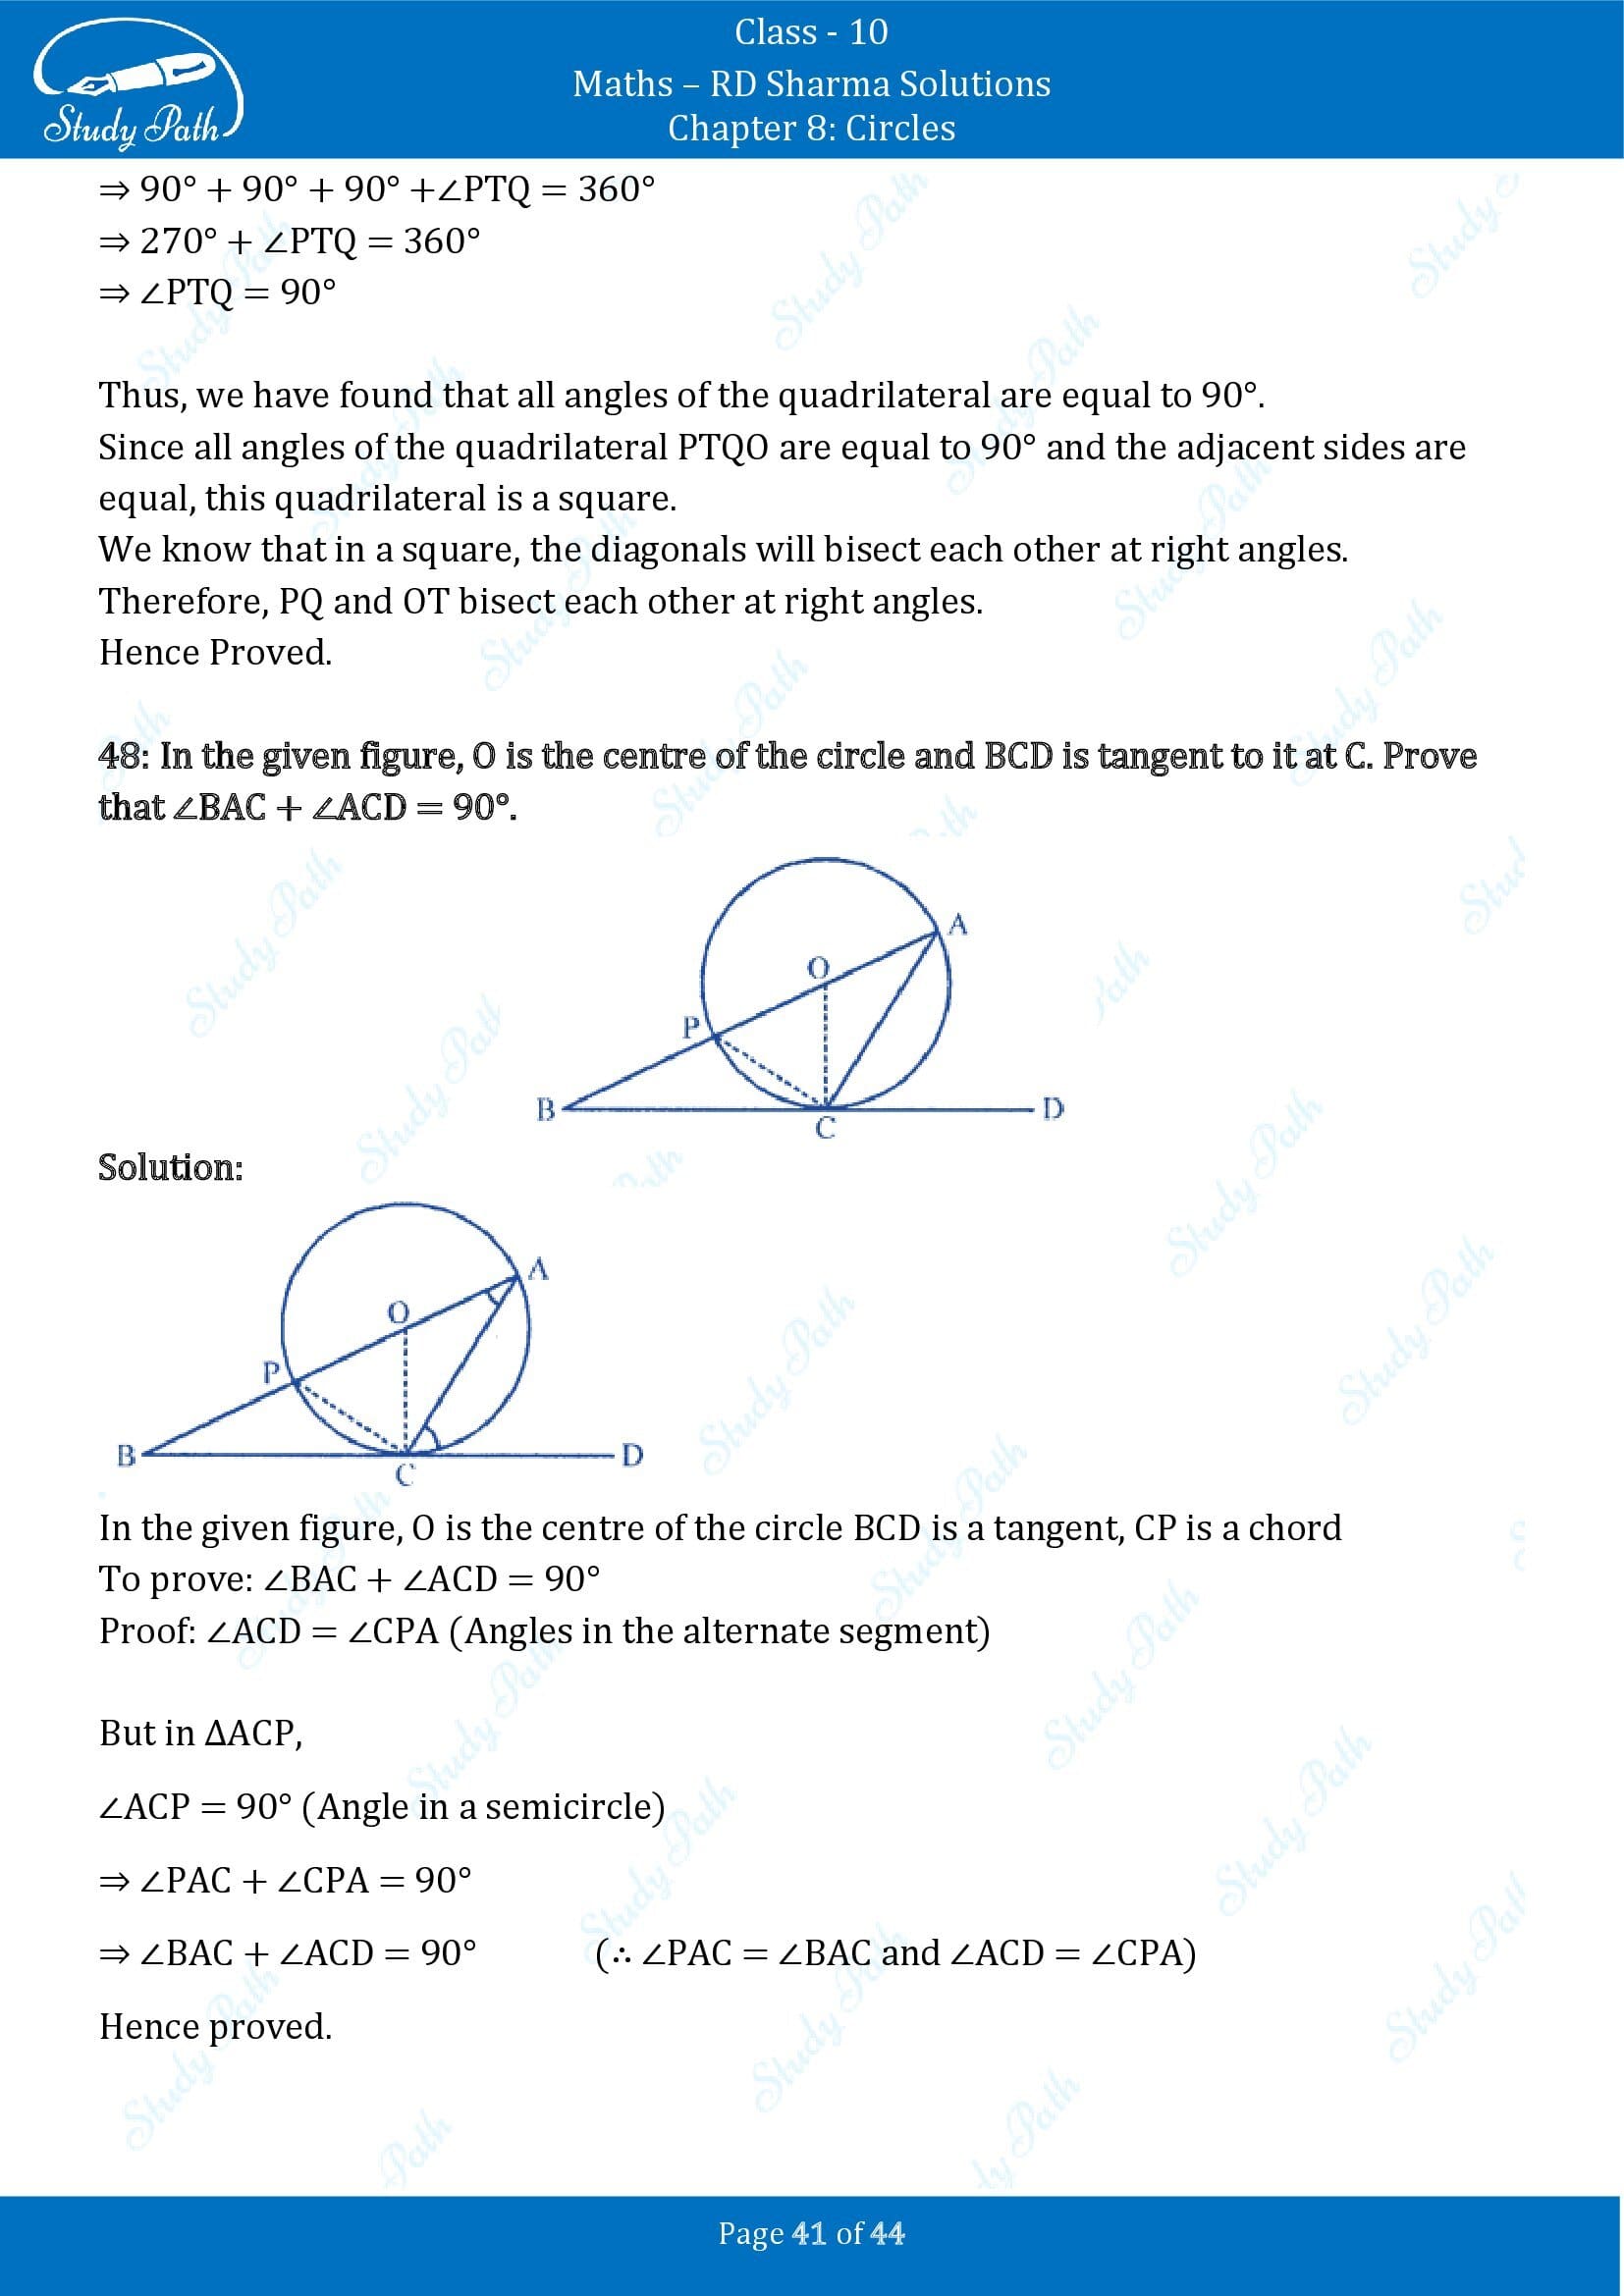 RD Sharma Solutions Class 10 Chapter 8 Circles Exercise 8.2 00041